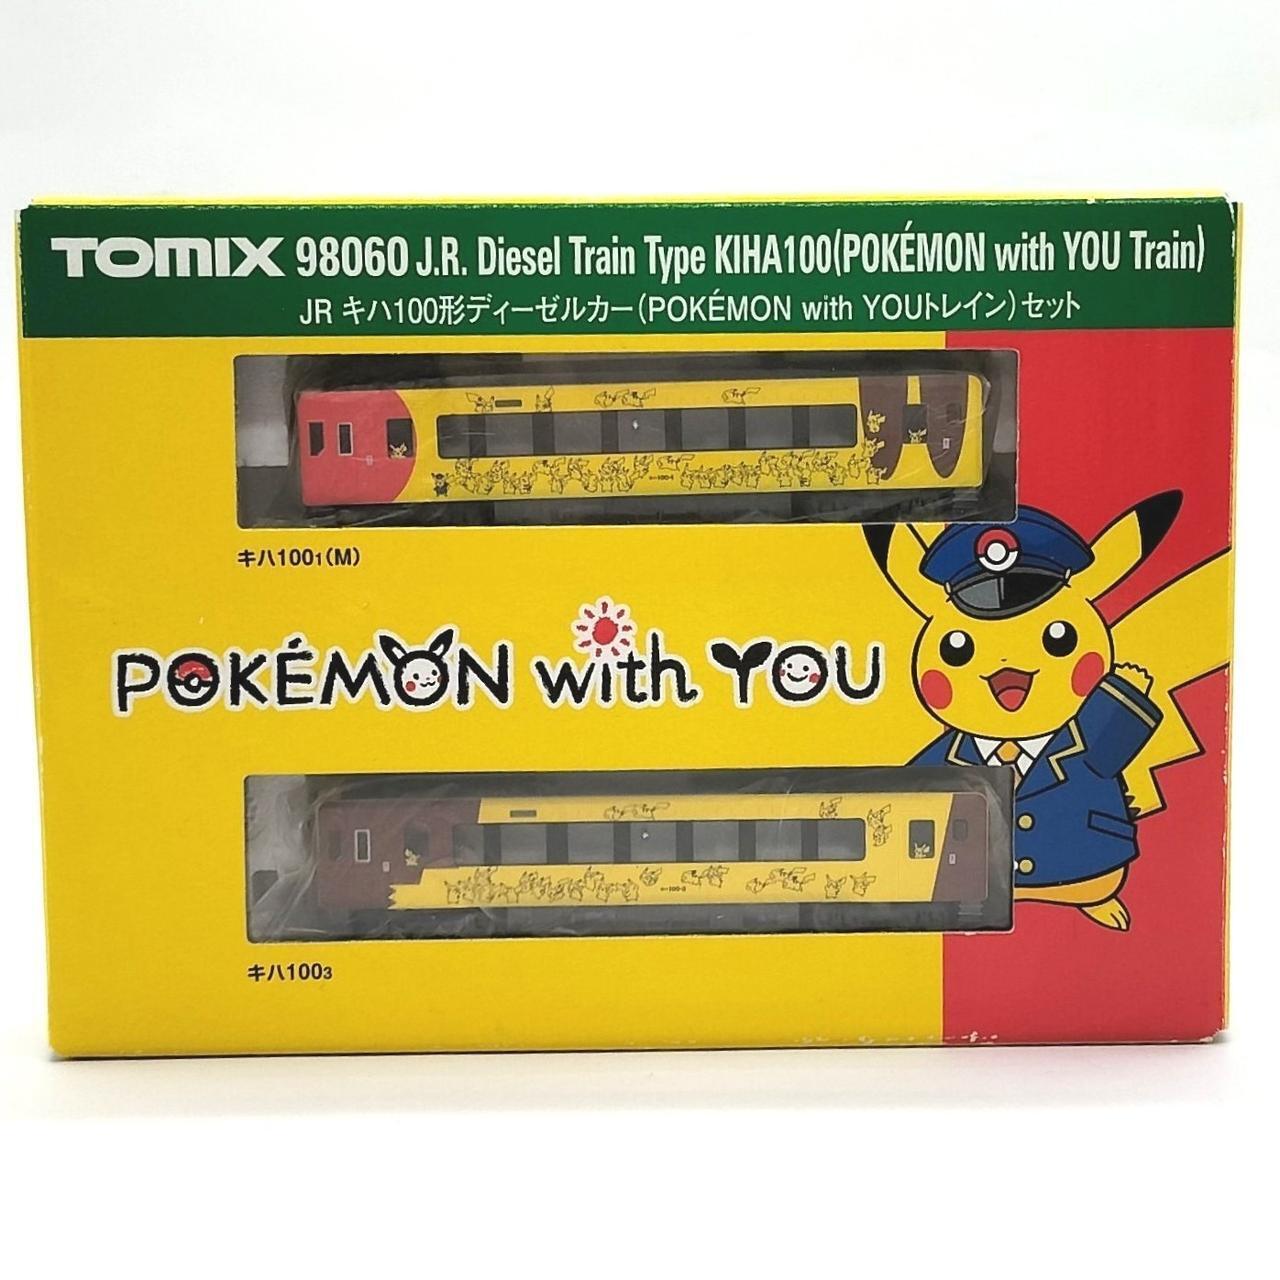 TOMIX 98060 N Scale Kiha 100 Type Form Diesel Set 2 Train Pokemon with YOU Model